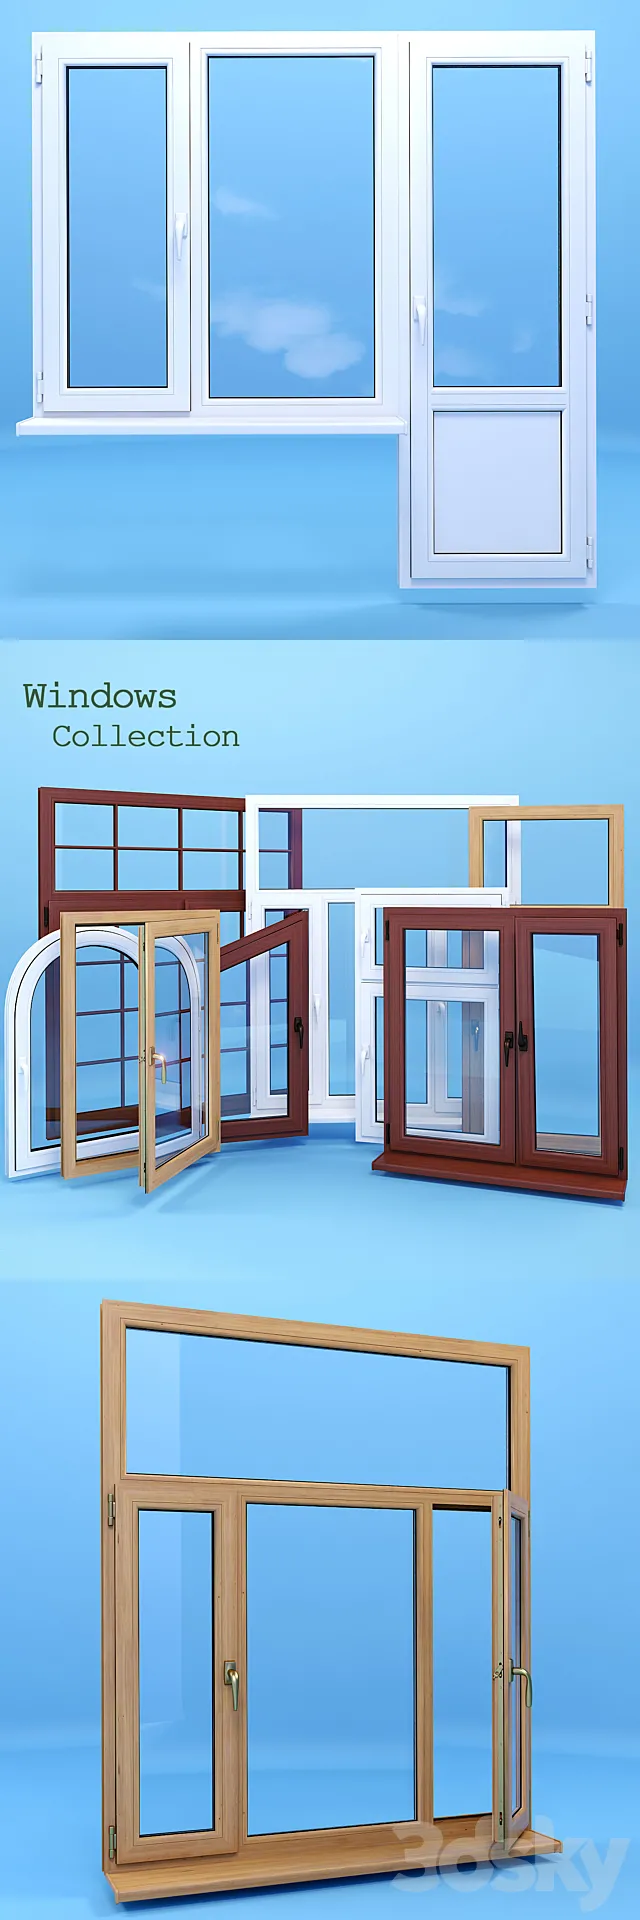 Windows collection 3DSMax File